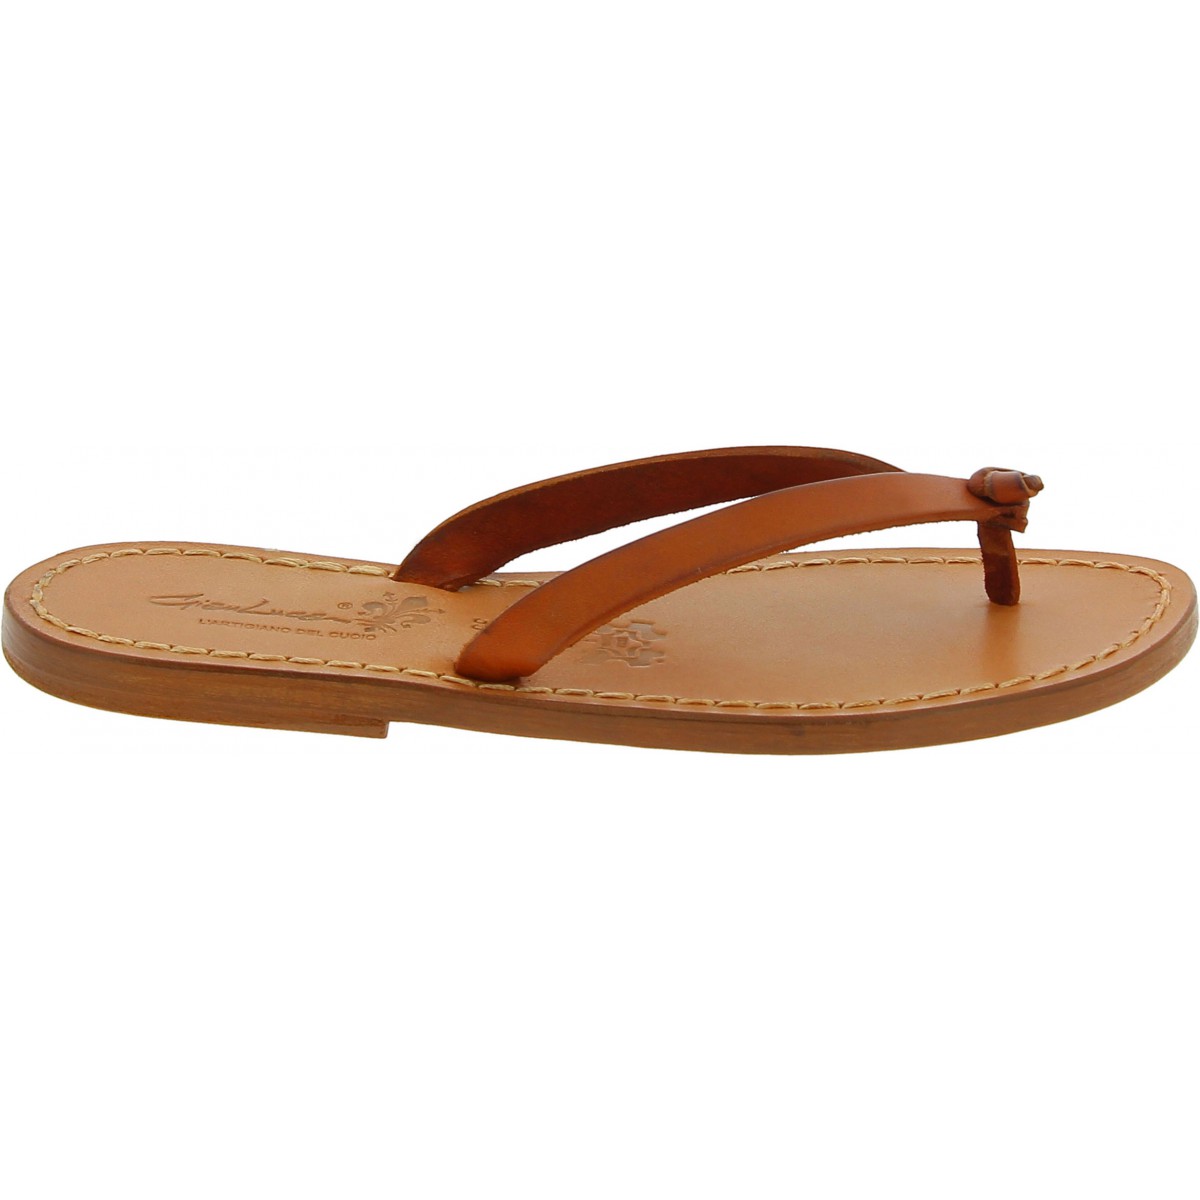 Handmade women's thong slippers tan leather | The craftsmen